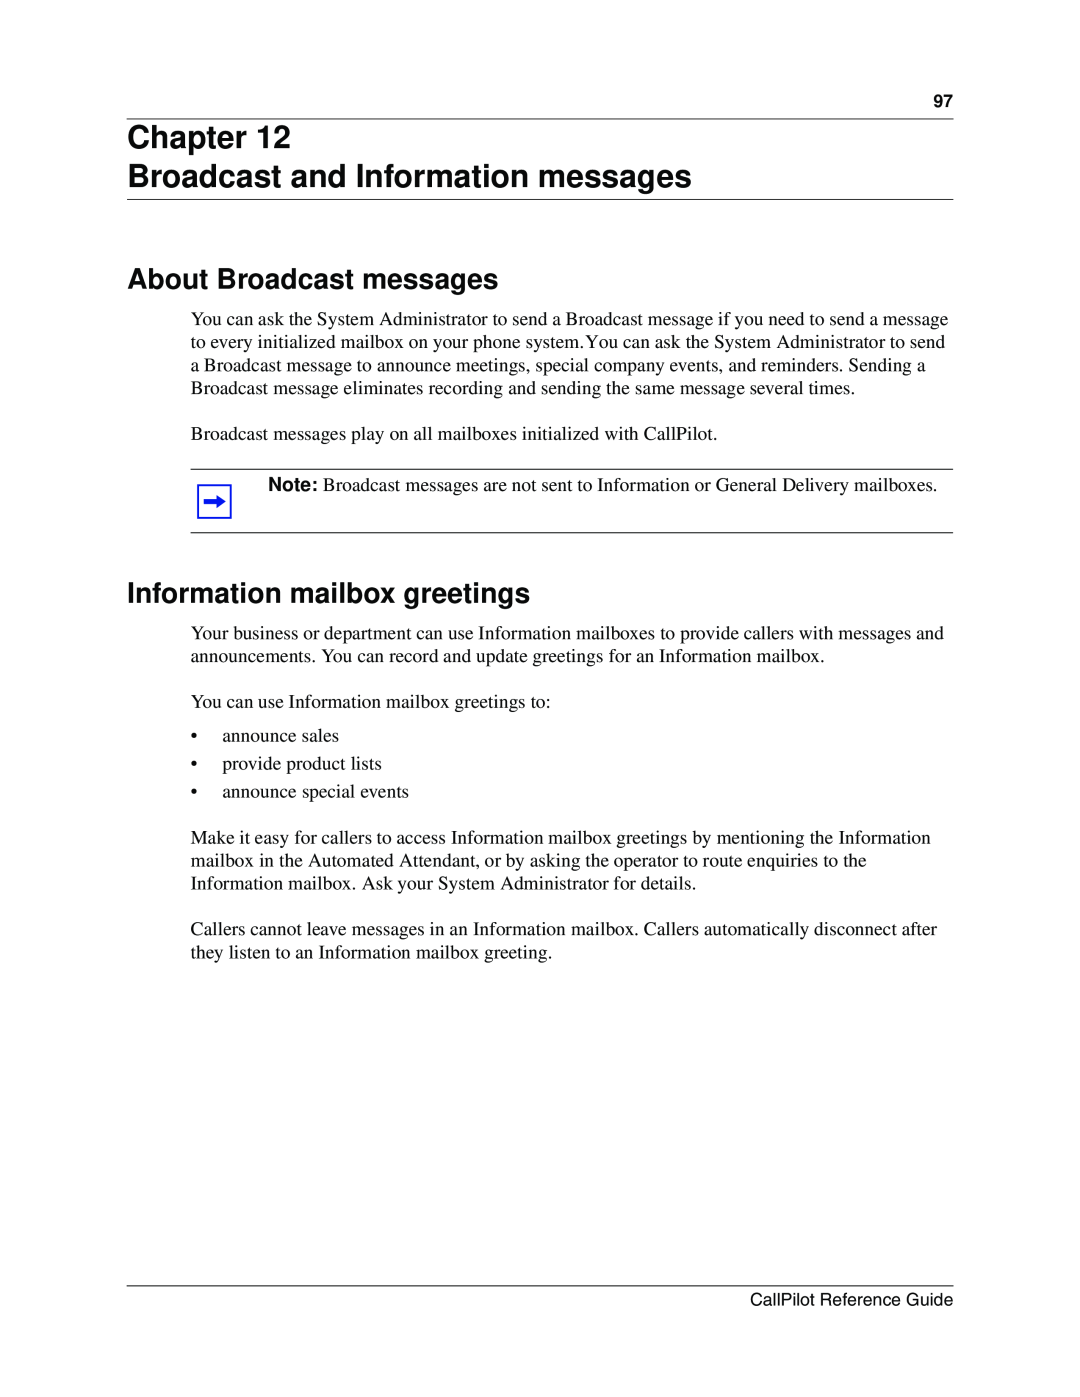 Nortel Networks CallPilot manual Chapter Broadcast and Information messages, About Broadcast messages 